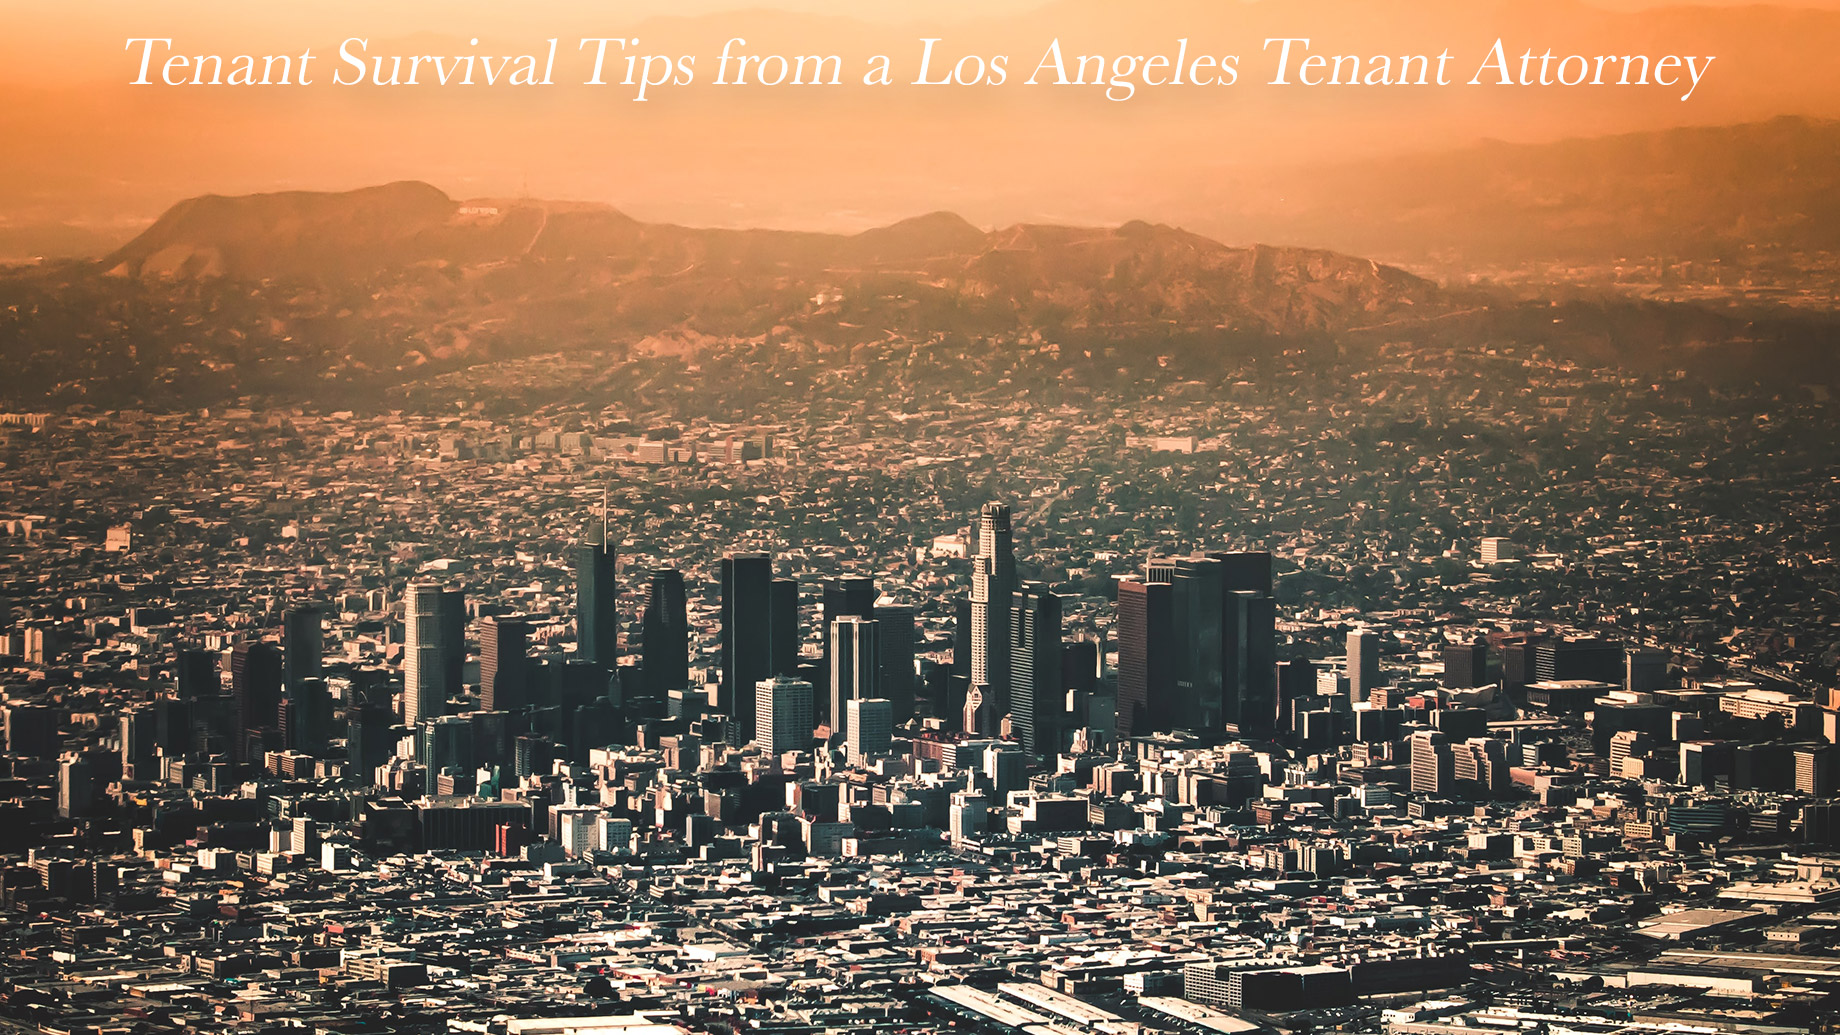 Tenant Survival Tips from a Los Angeles Tenant Attorney